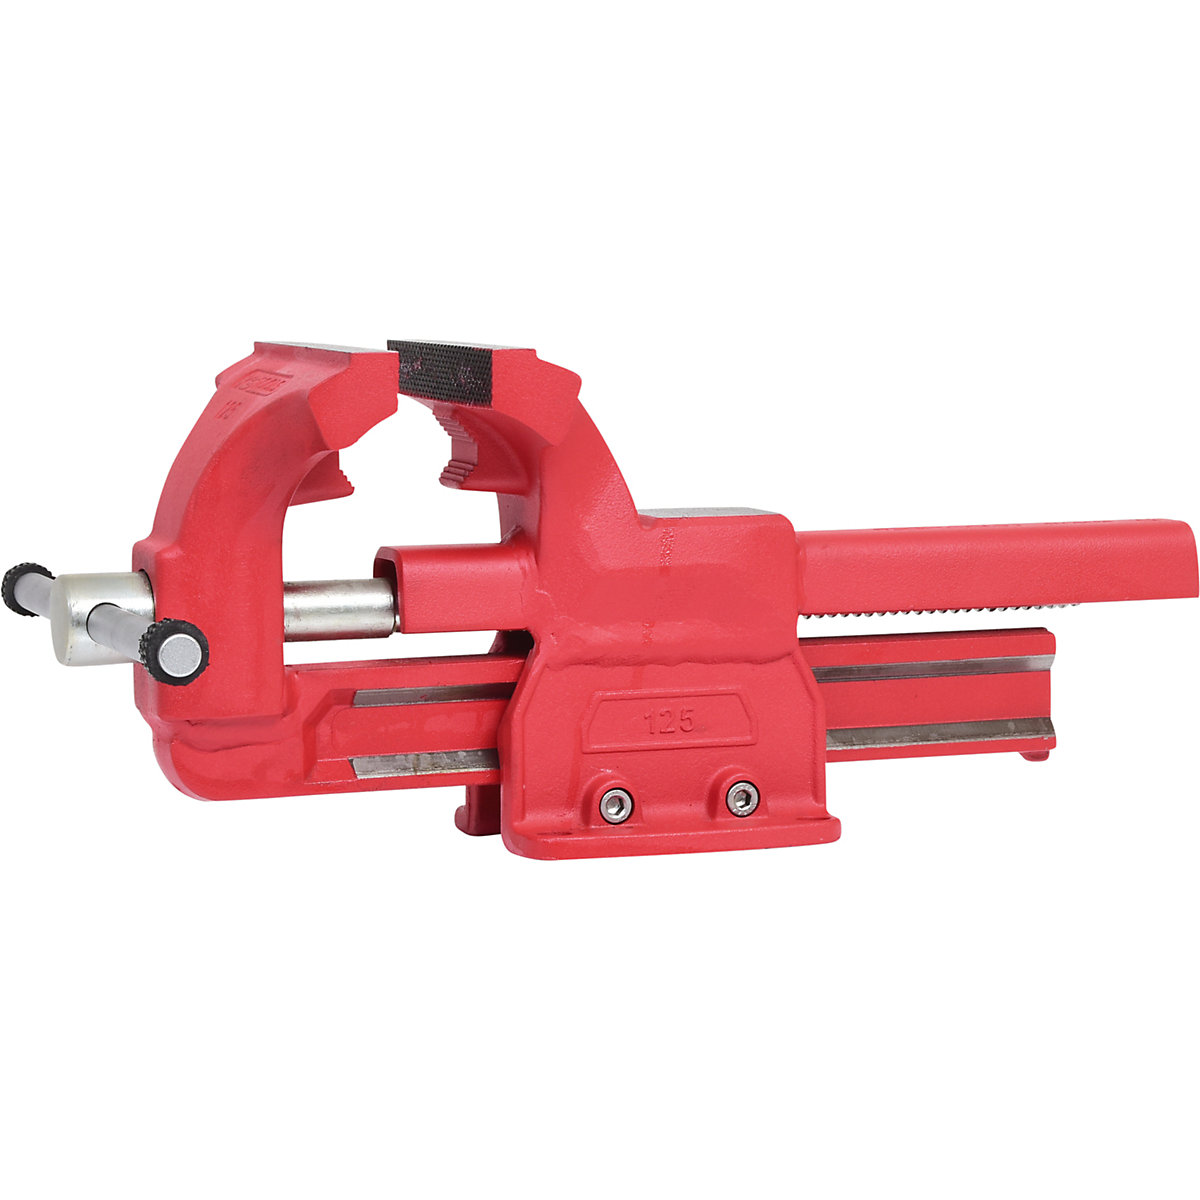 Parallel vice without round plate - KS Tools